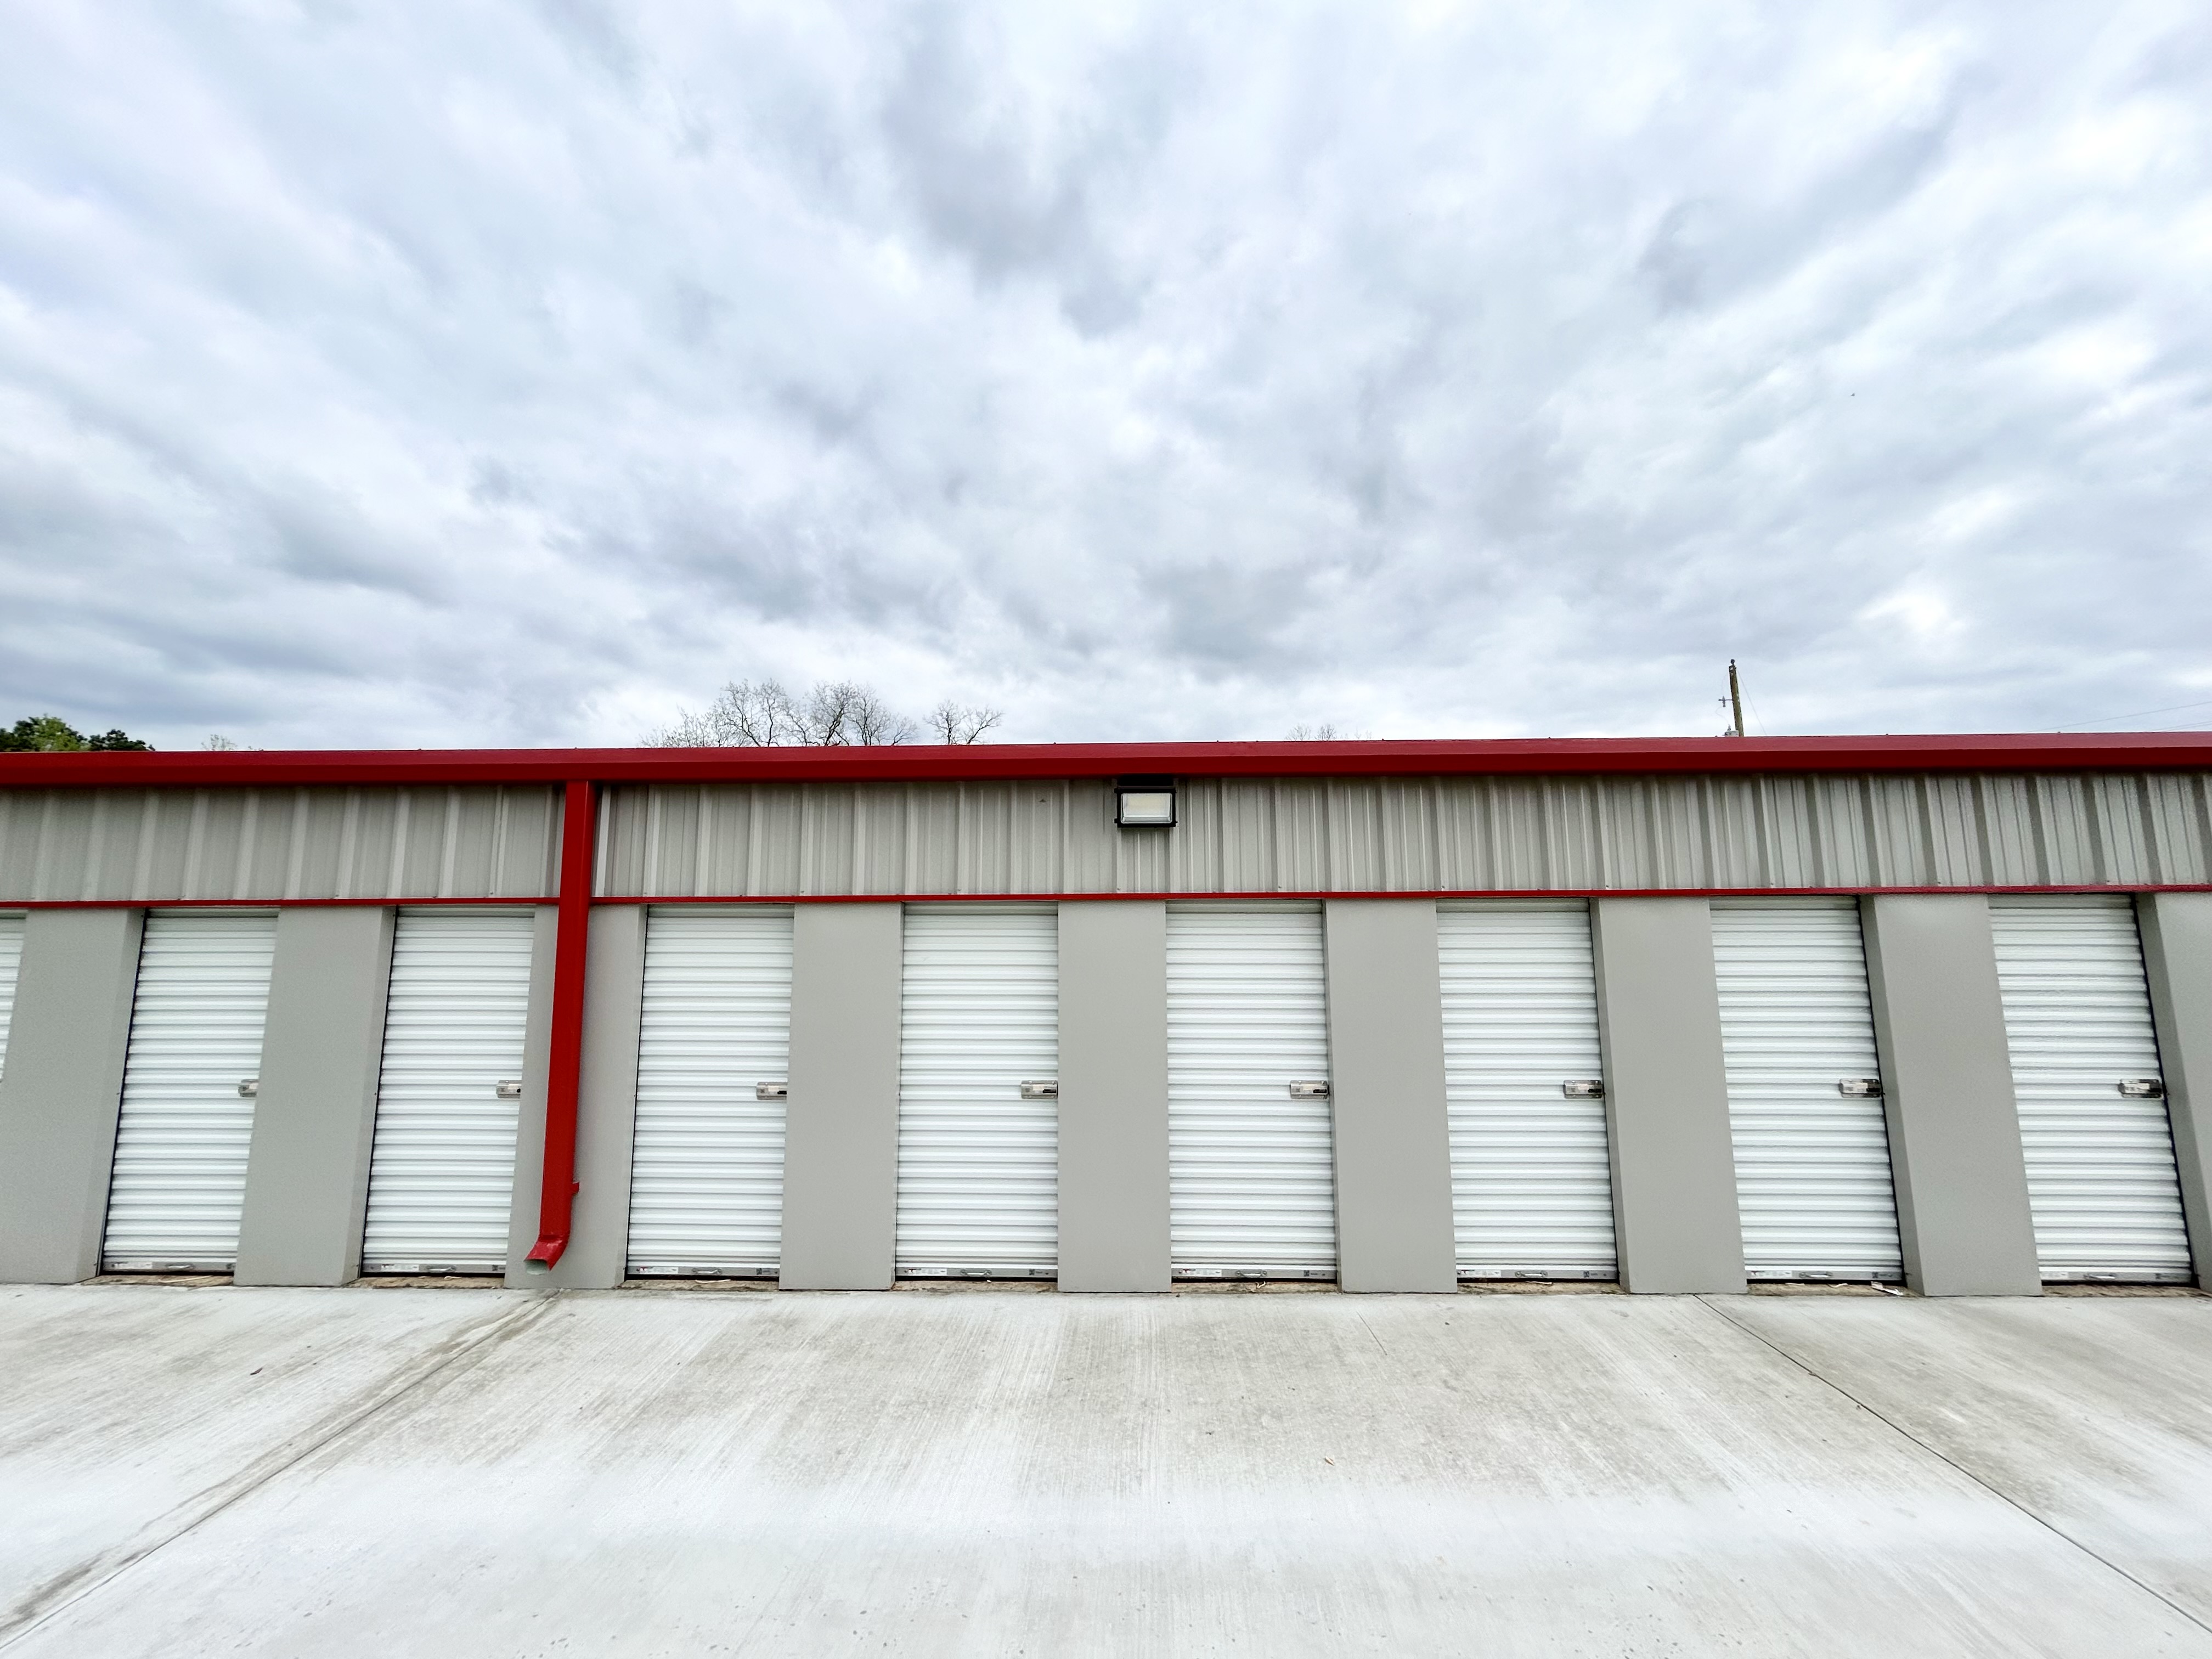  Self Storage in Gilmer, TX with Secure Climate Control Storage and Smart Lock Technology 